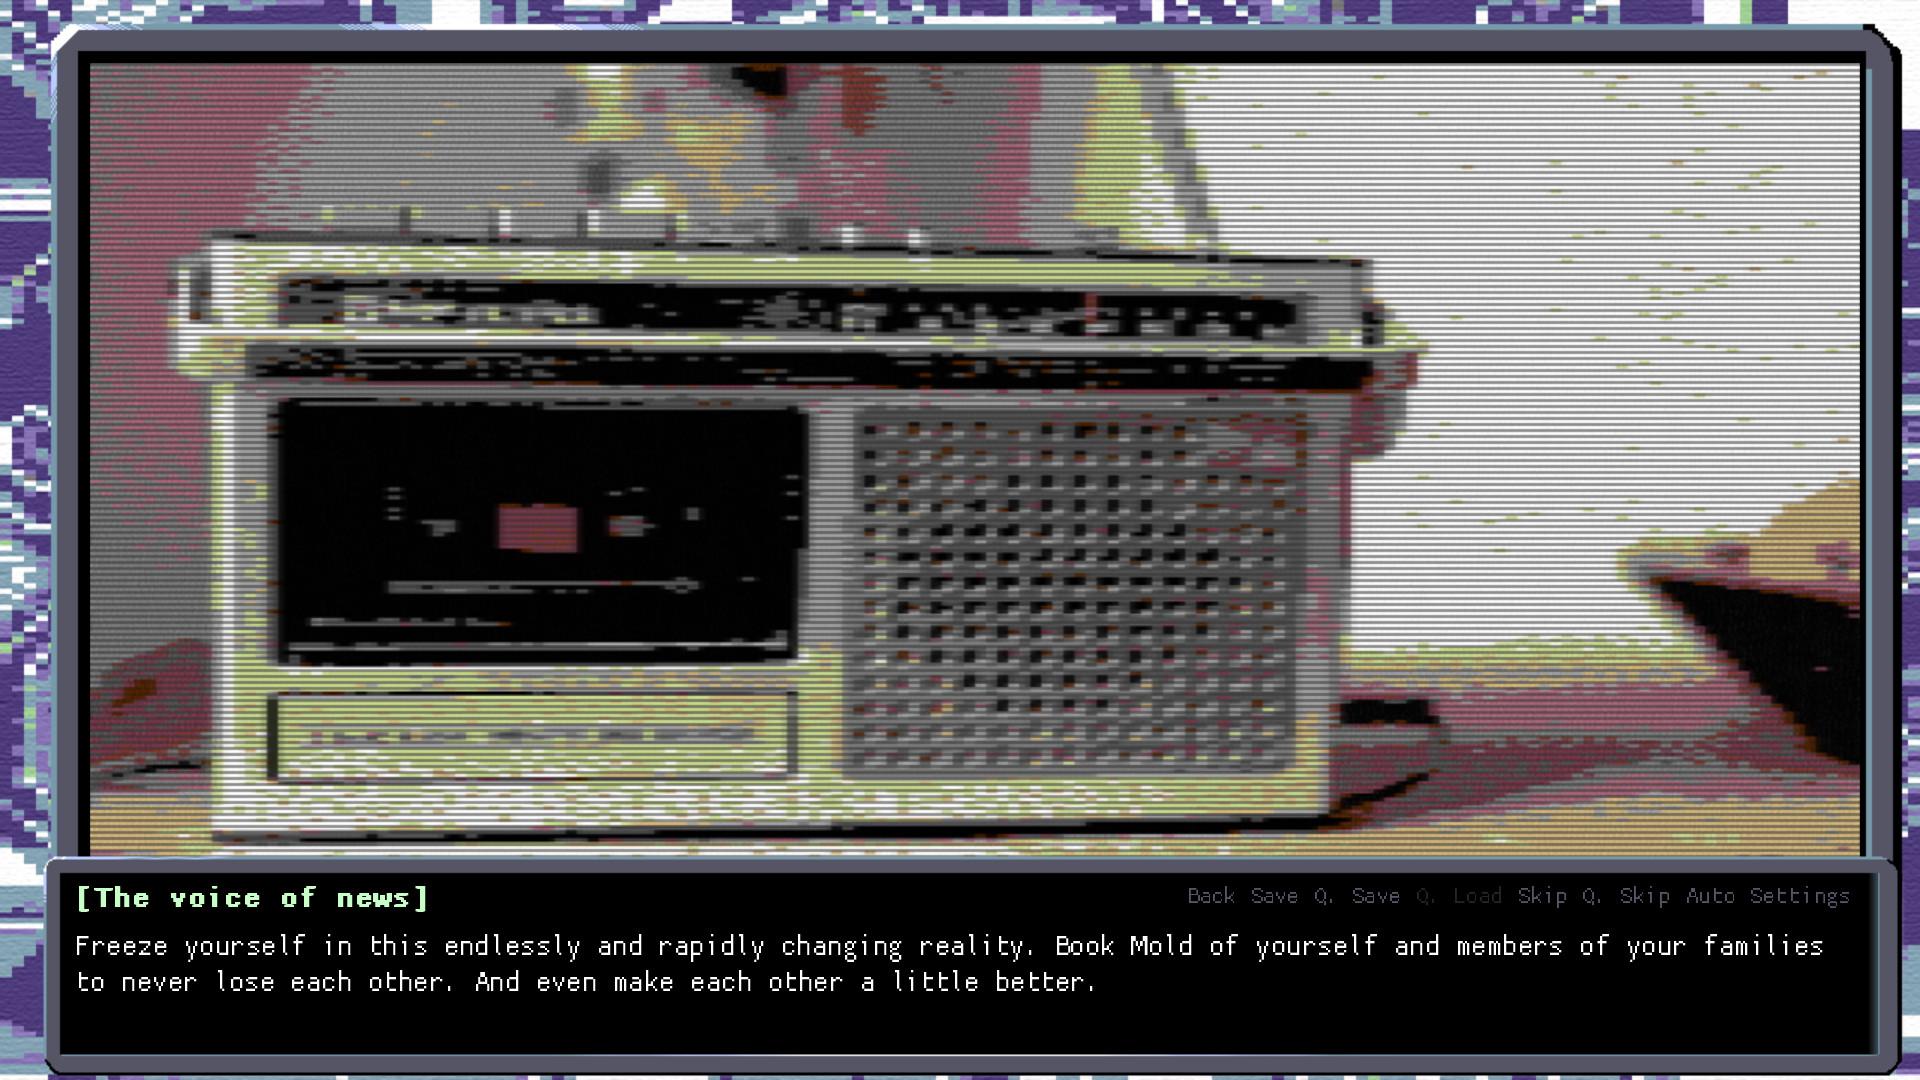 Screenshot №6 from game Cyber City 2157: The Visual Novel